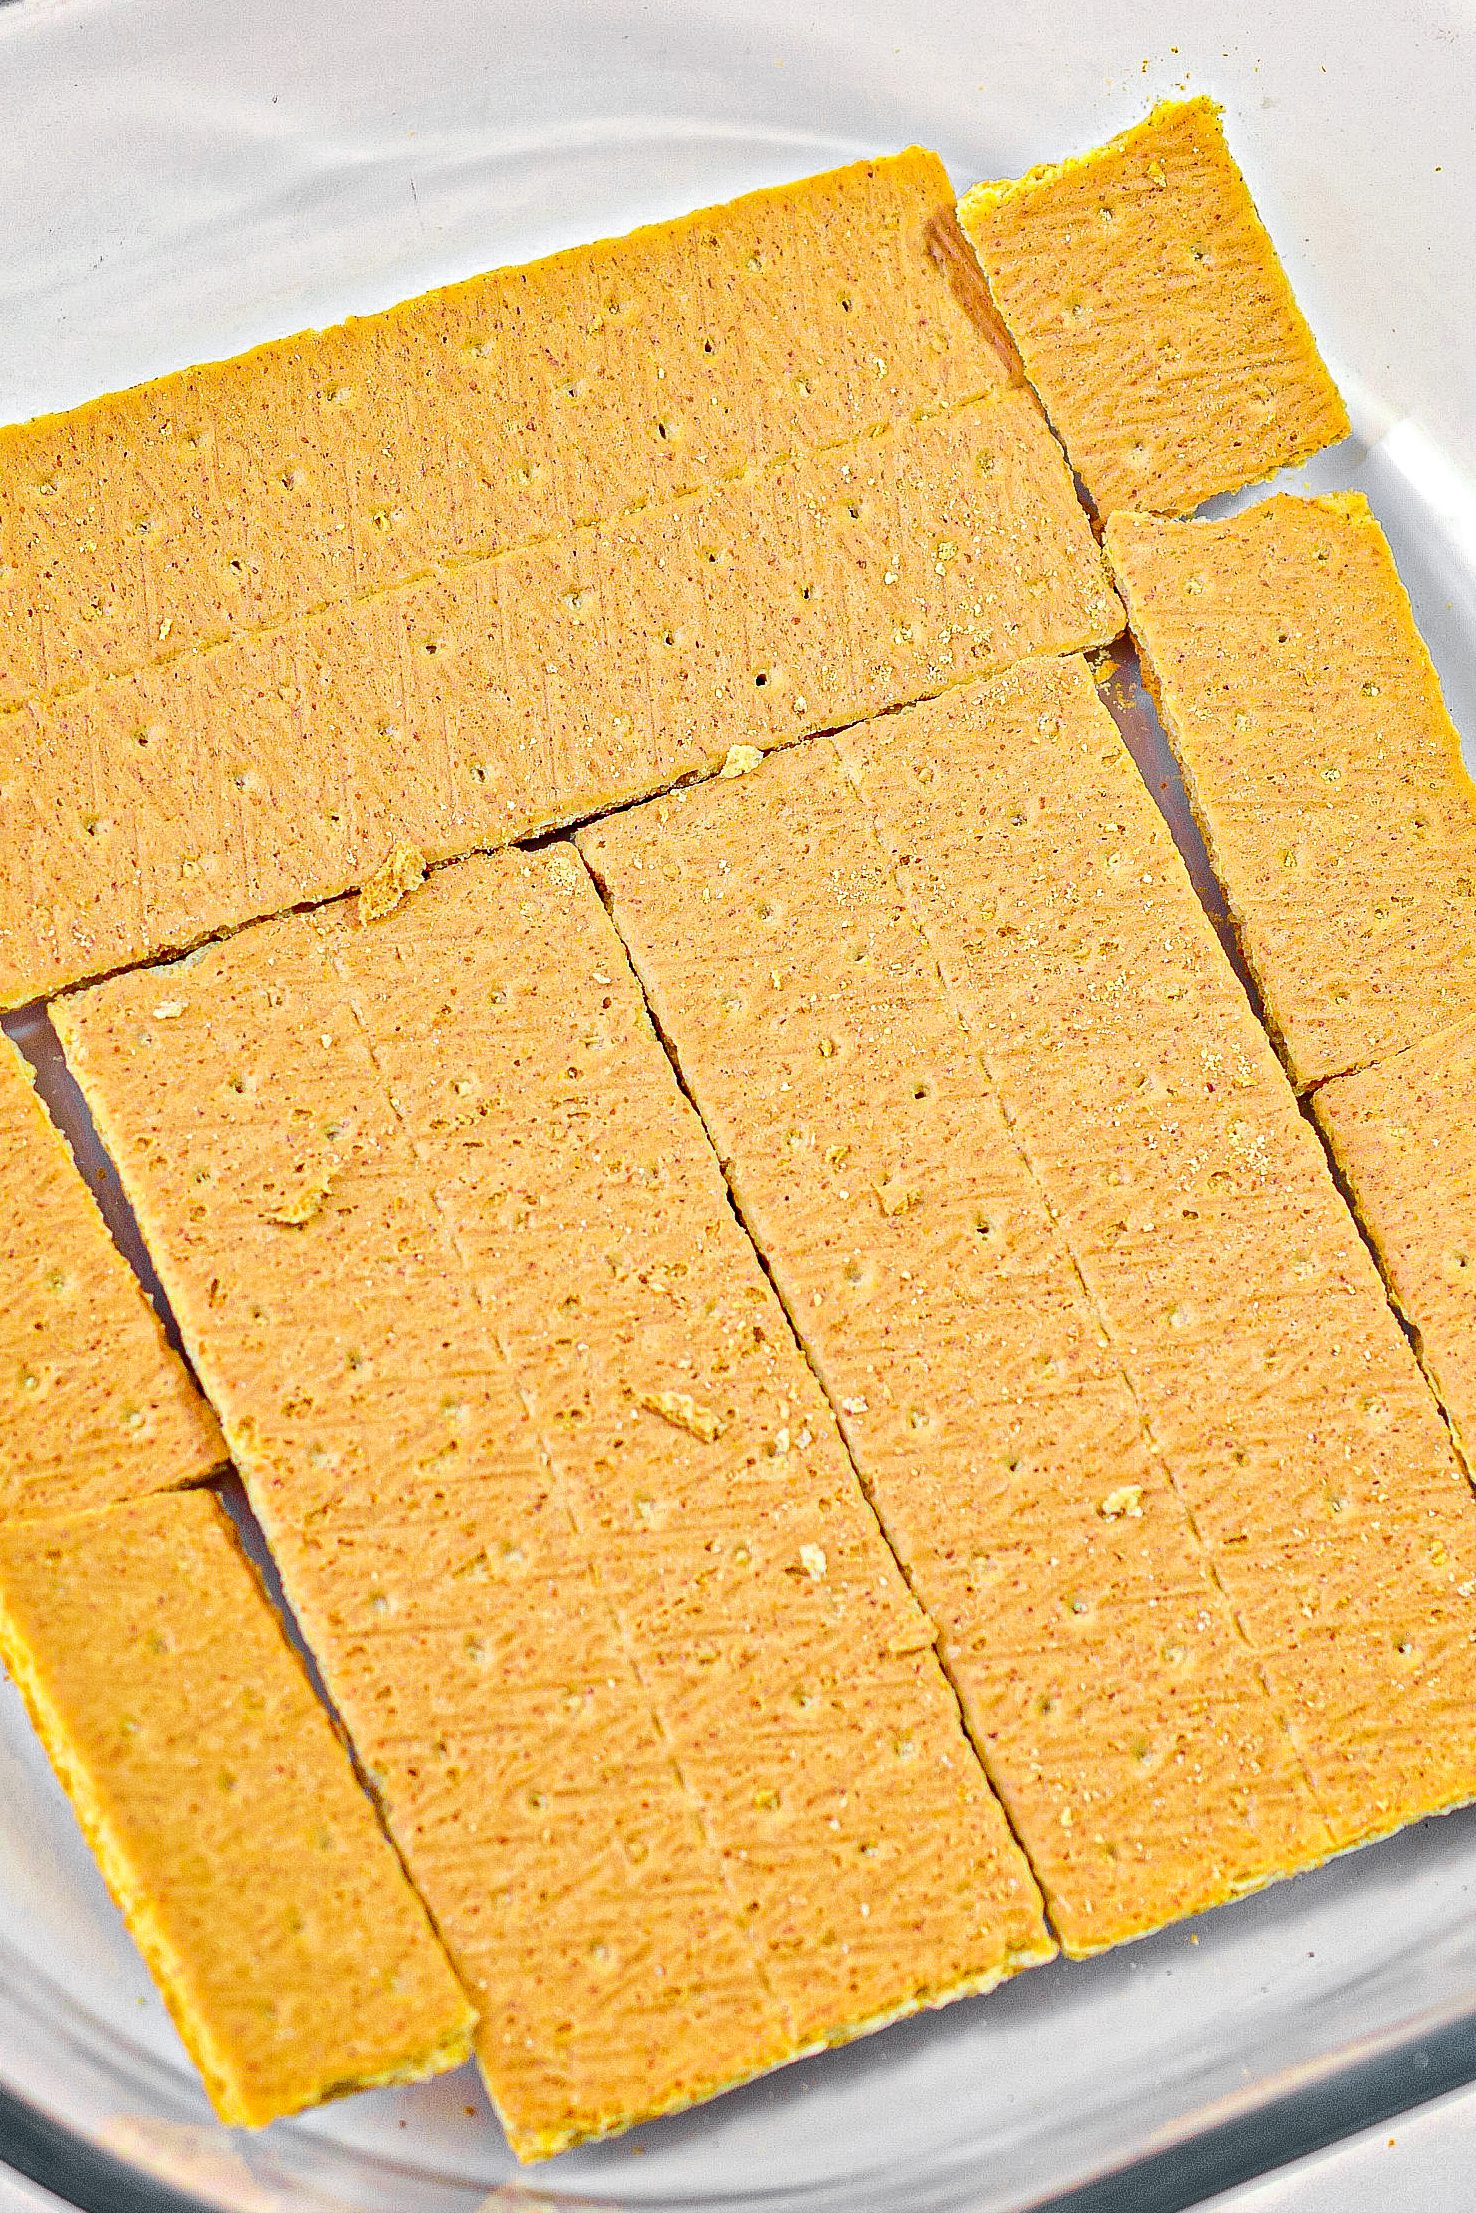 Place a layer of graham crackers in the bottom of a 9x9 baking dish. You can break the graham crackers up as needed to line it completely.